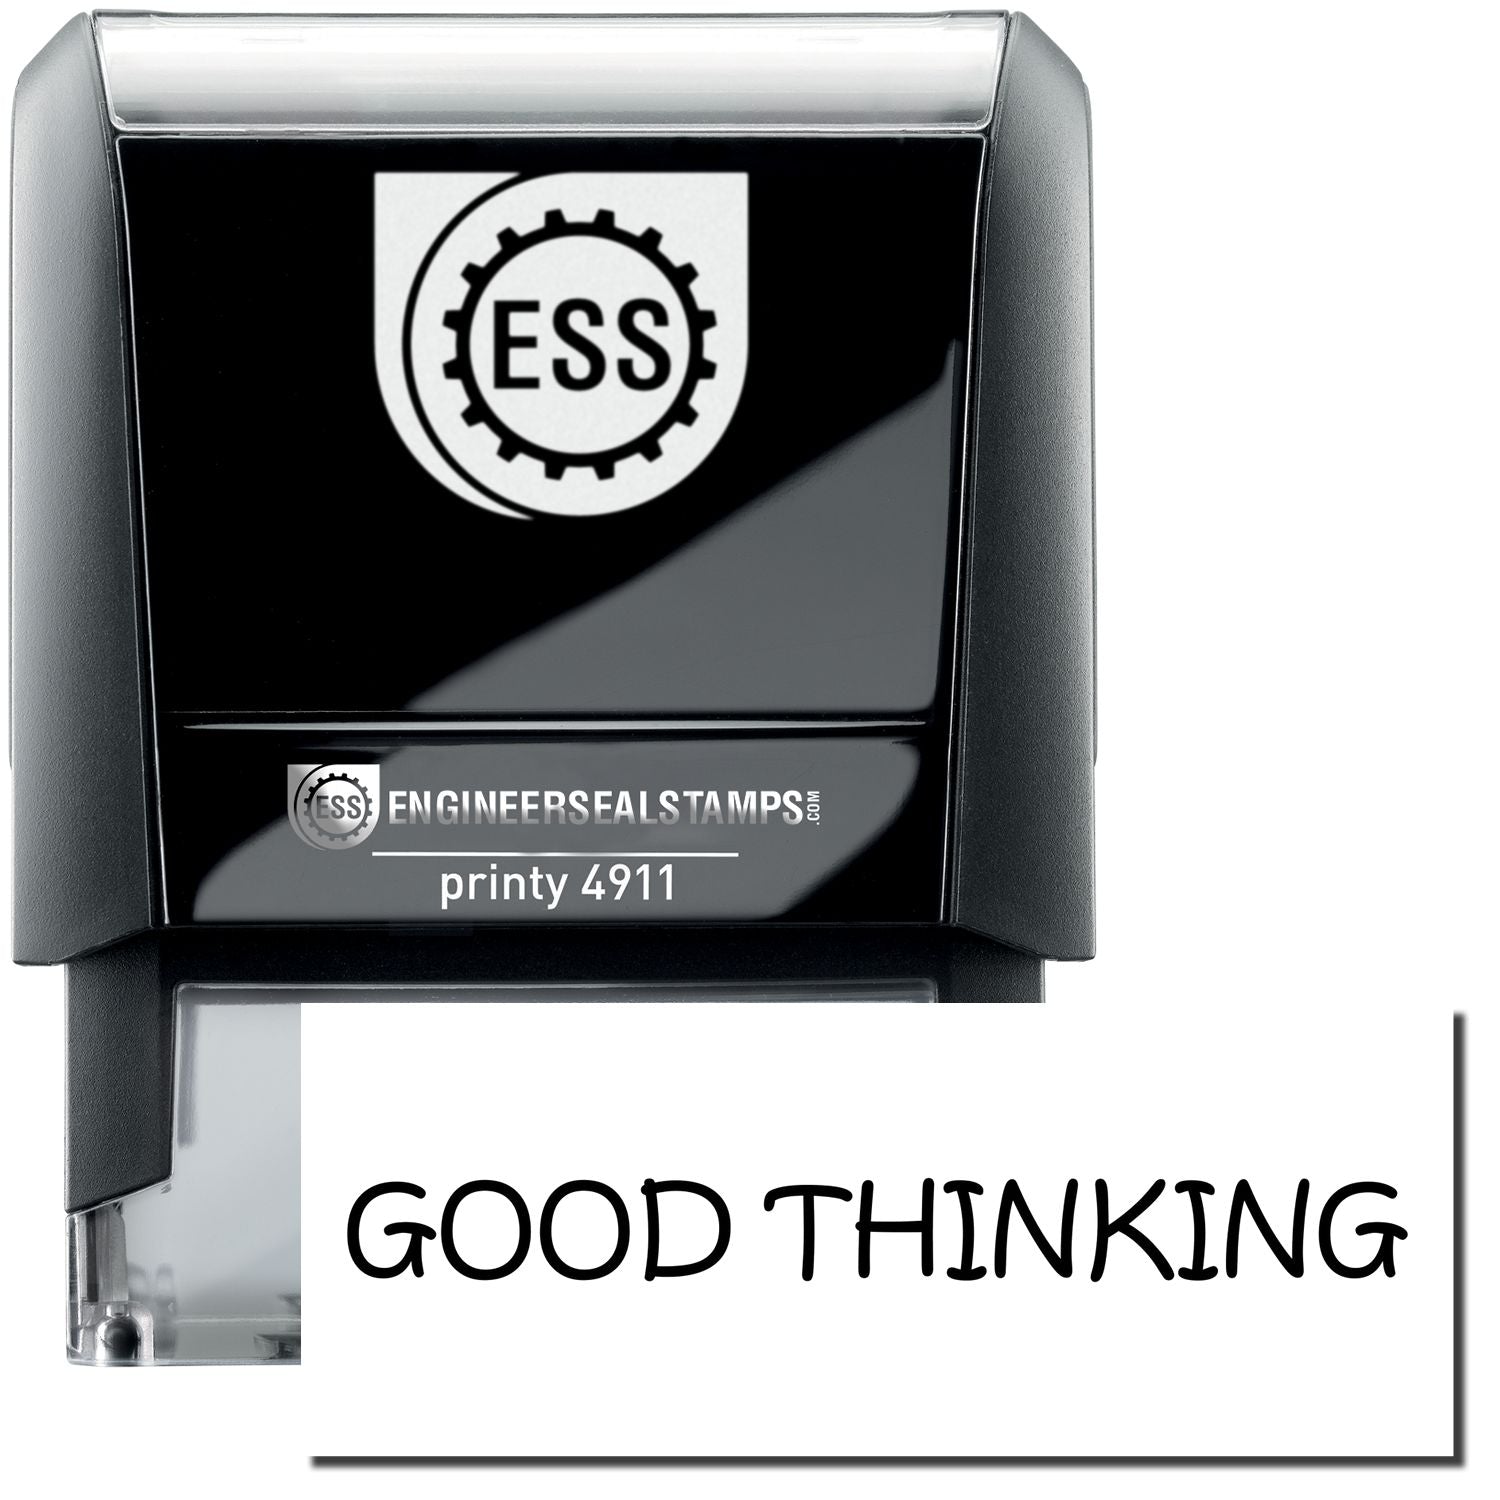 A self-inking stamp with a stamped image showing how the text "GOOD THINKING" is displayed after stamping.